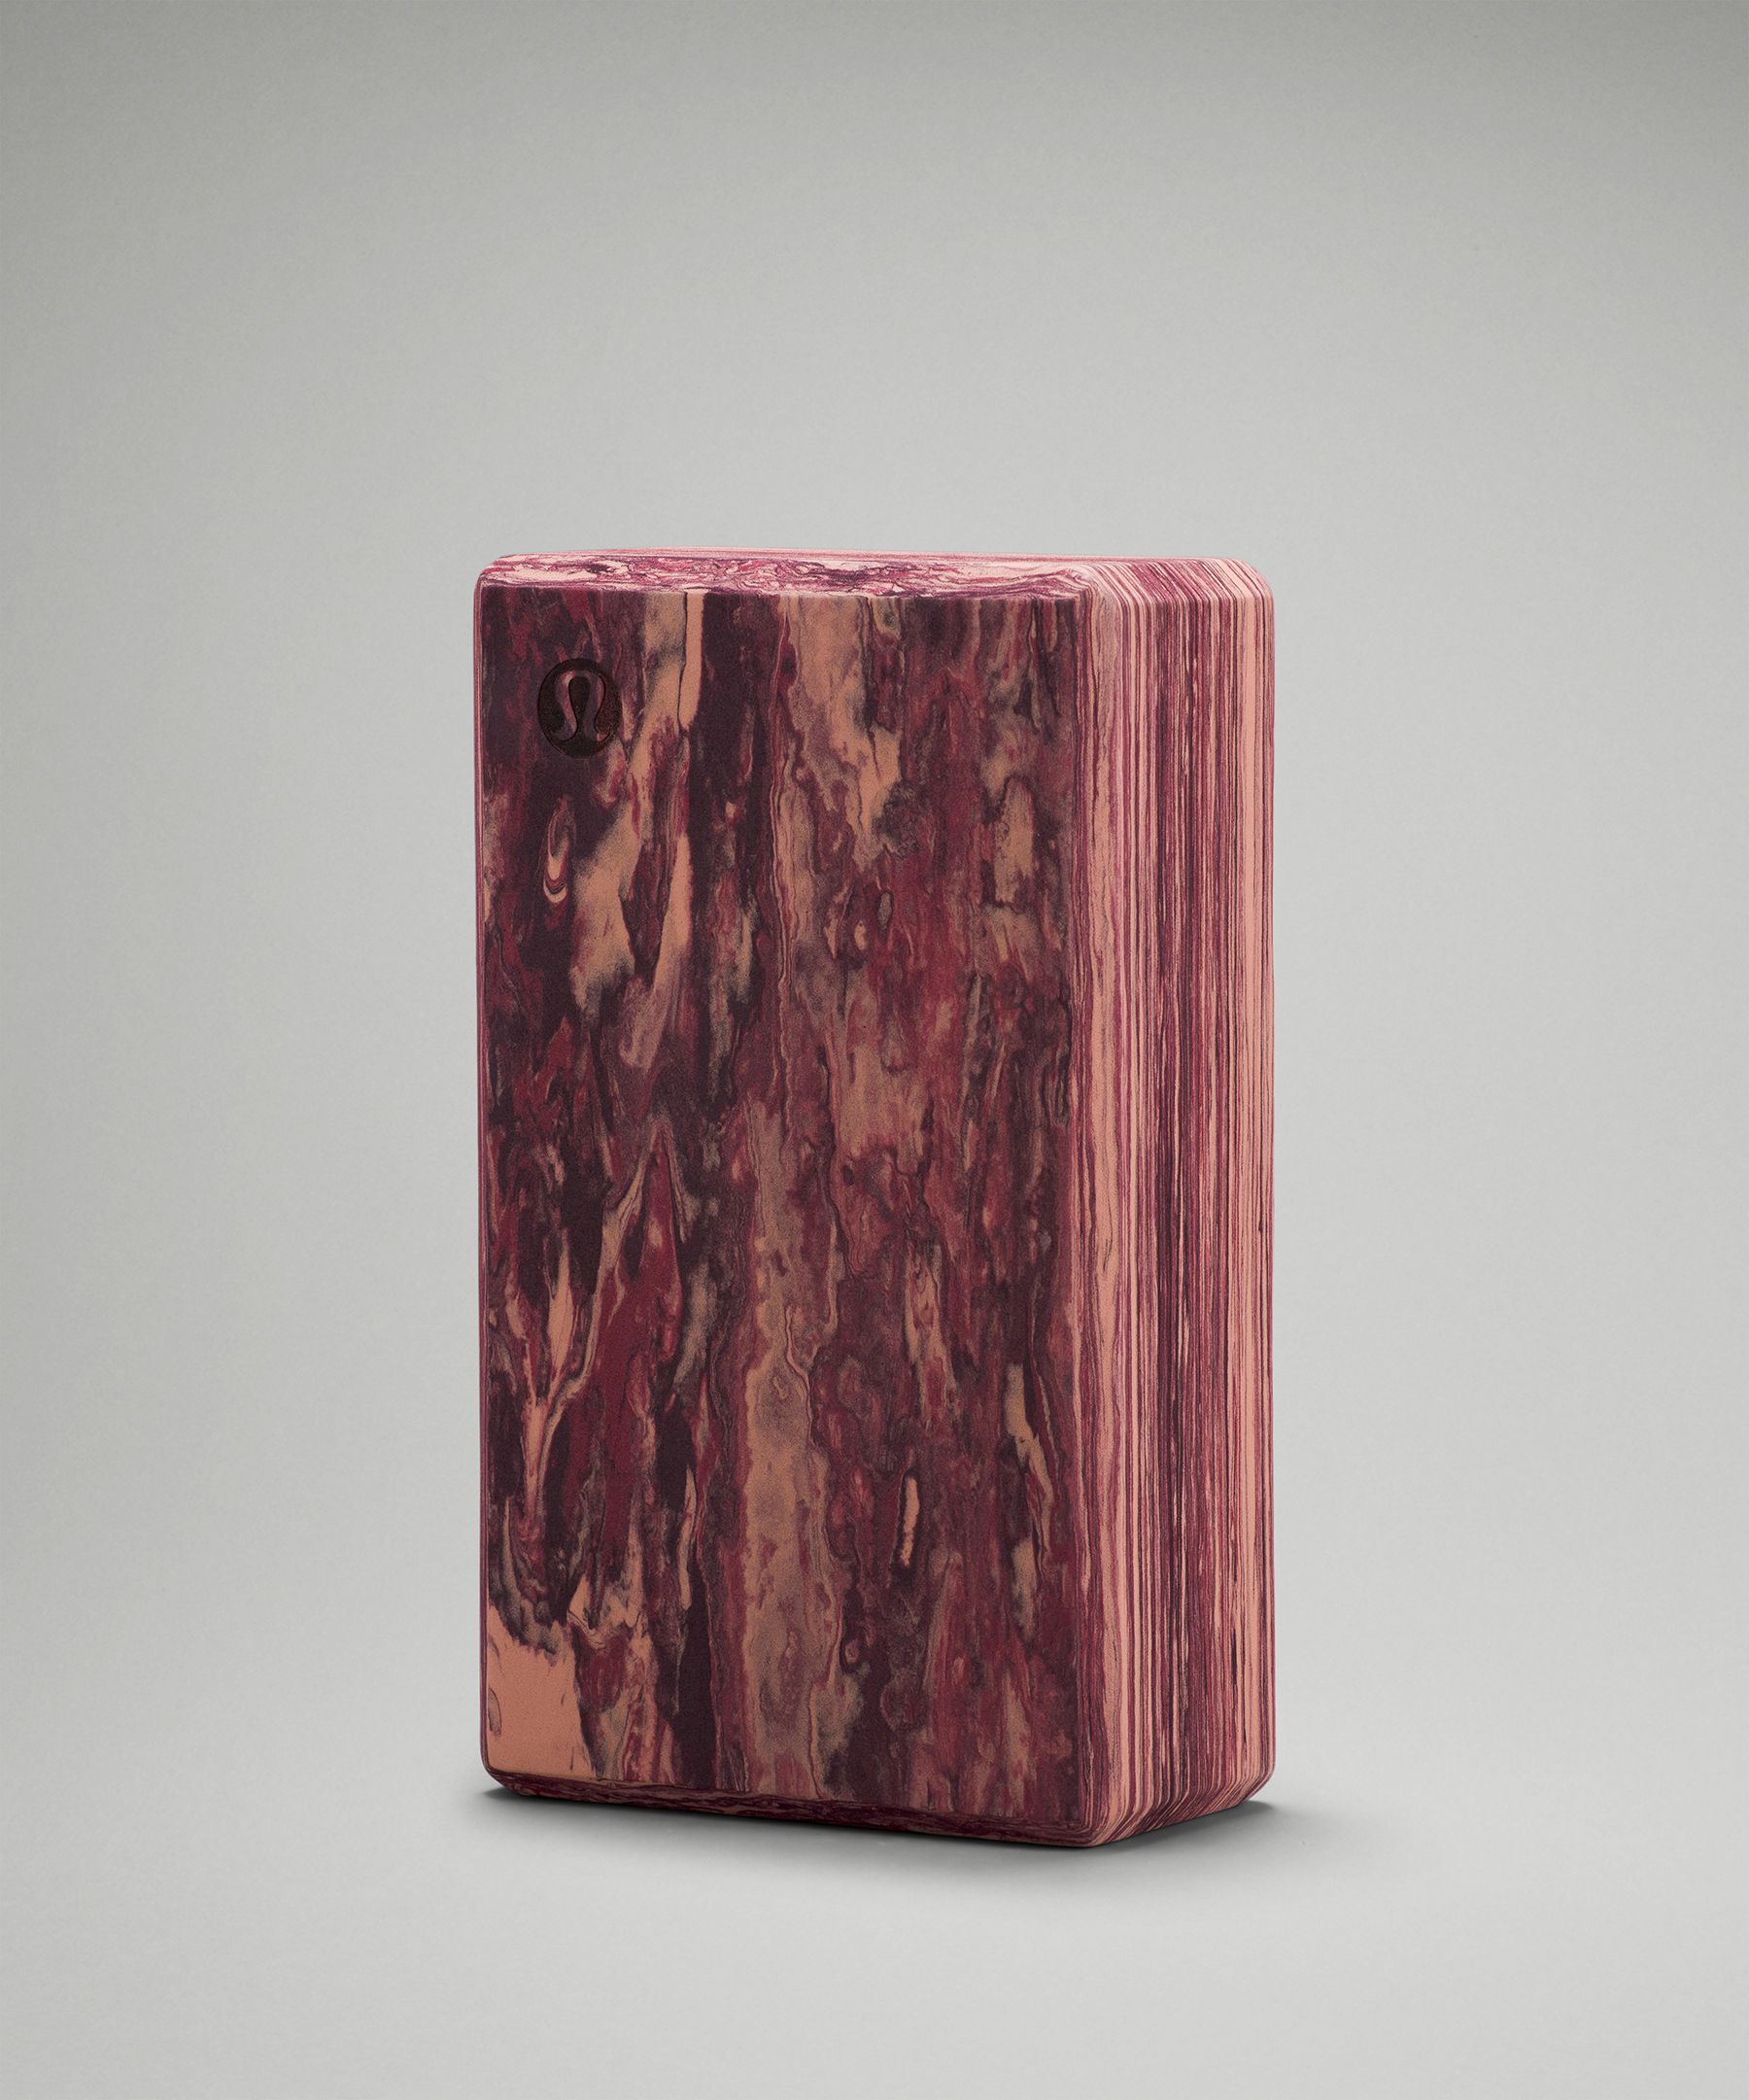 Lululemon Lift And Lengthen Yoga Block Marbled In Pink Savannah/mulled Wine/cassis